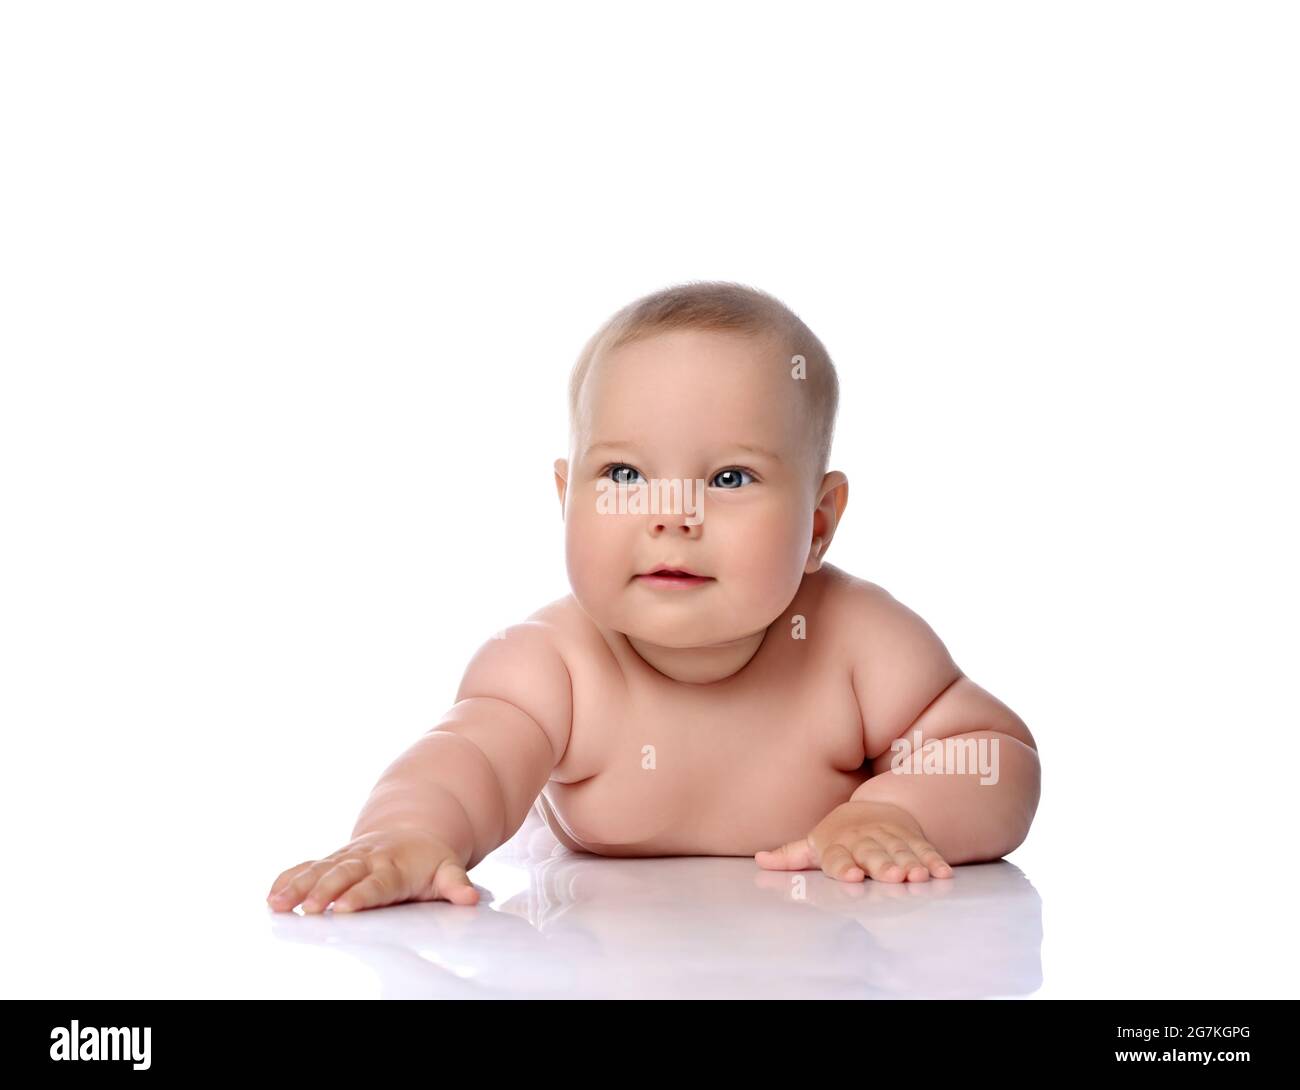 Healthy infant child baby girl kid in diaper is lying on her stomach holding arm outstretched, slapping on floor  Stock Photo